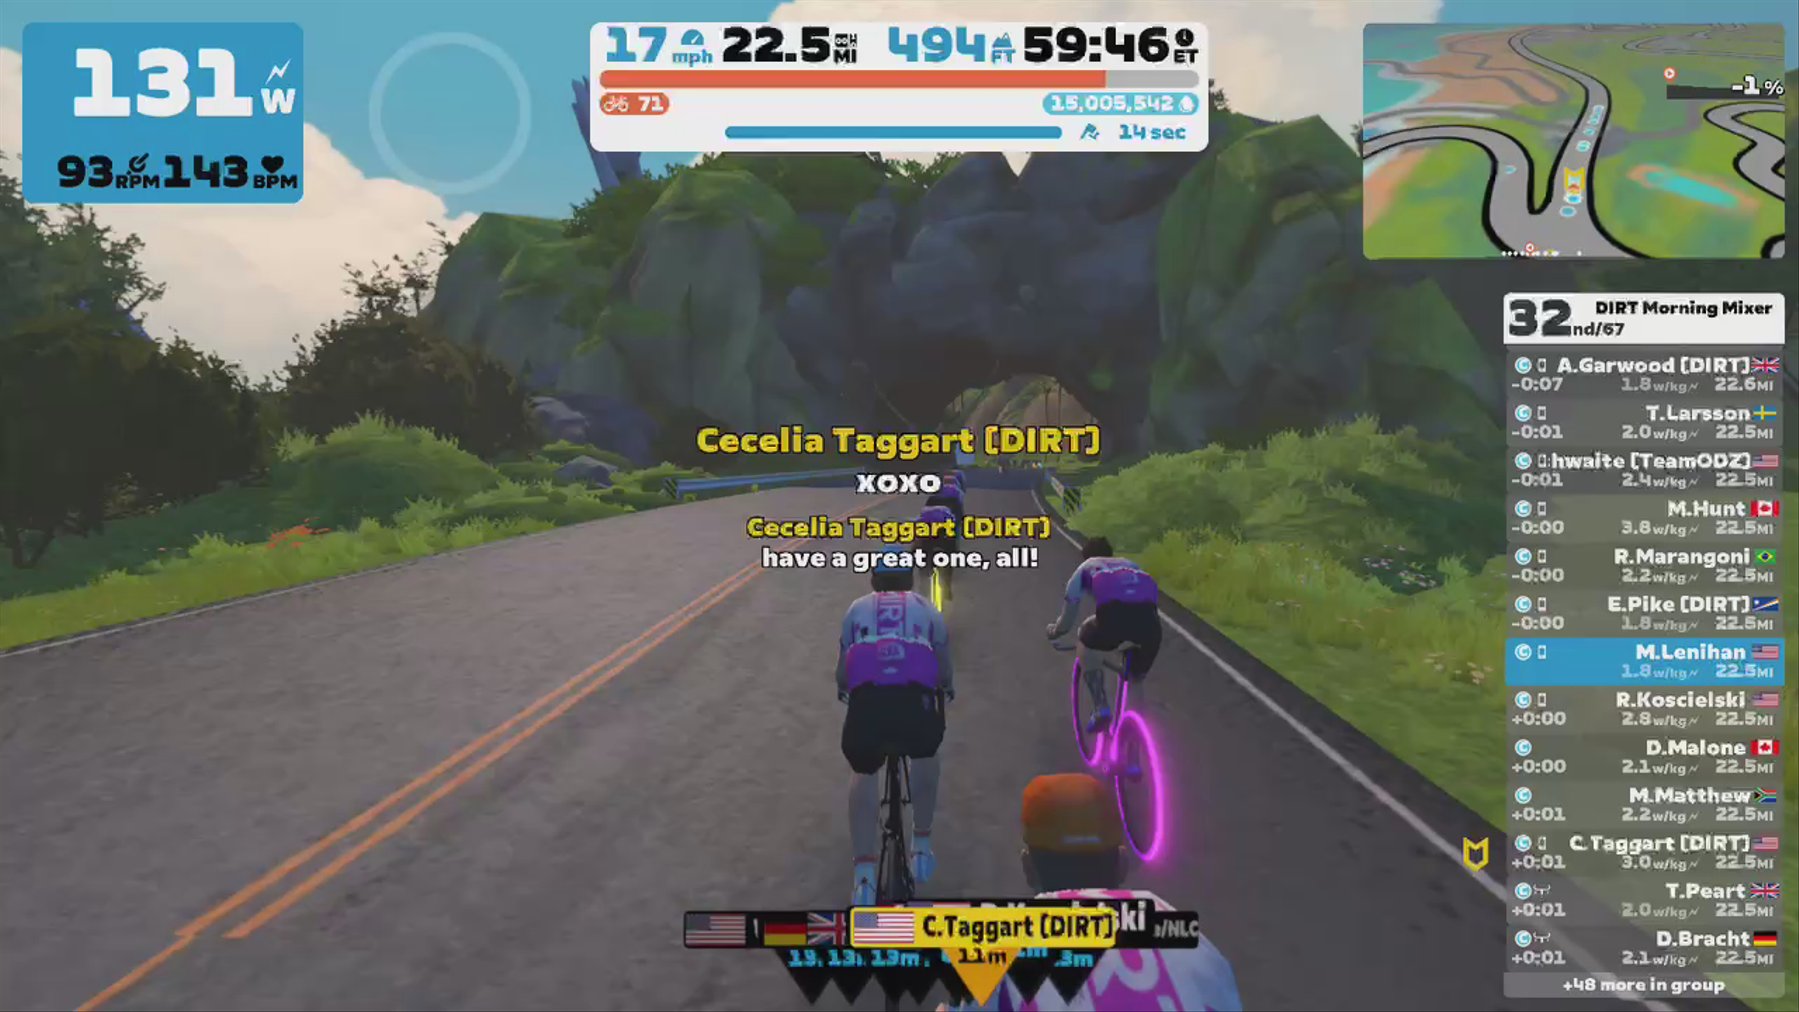 Zwift - Group Ride: DIRT Morning Mixer (C) on Volcano Flat in Watopia